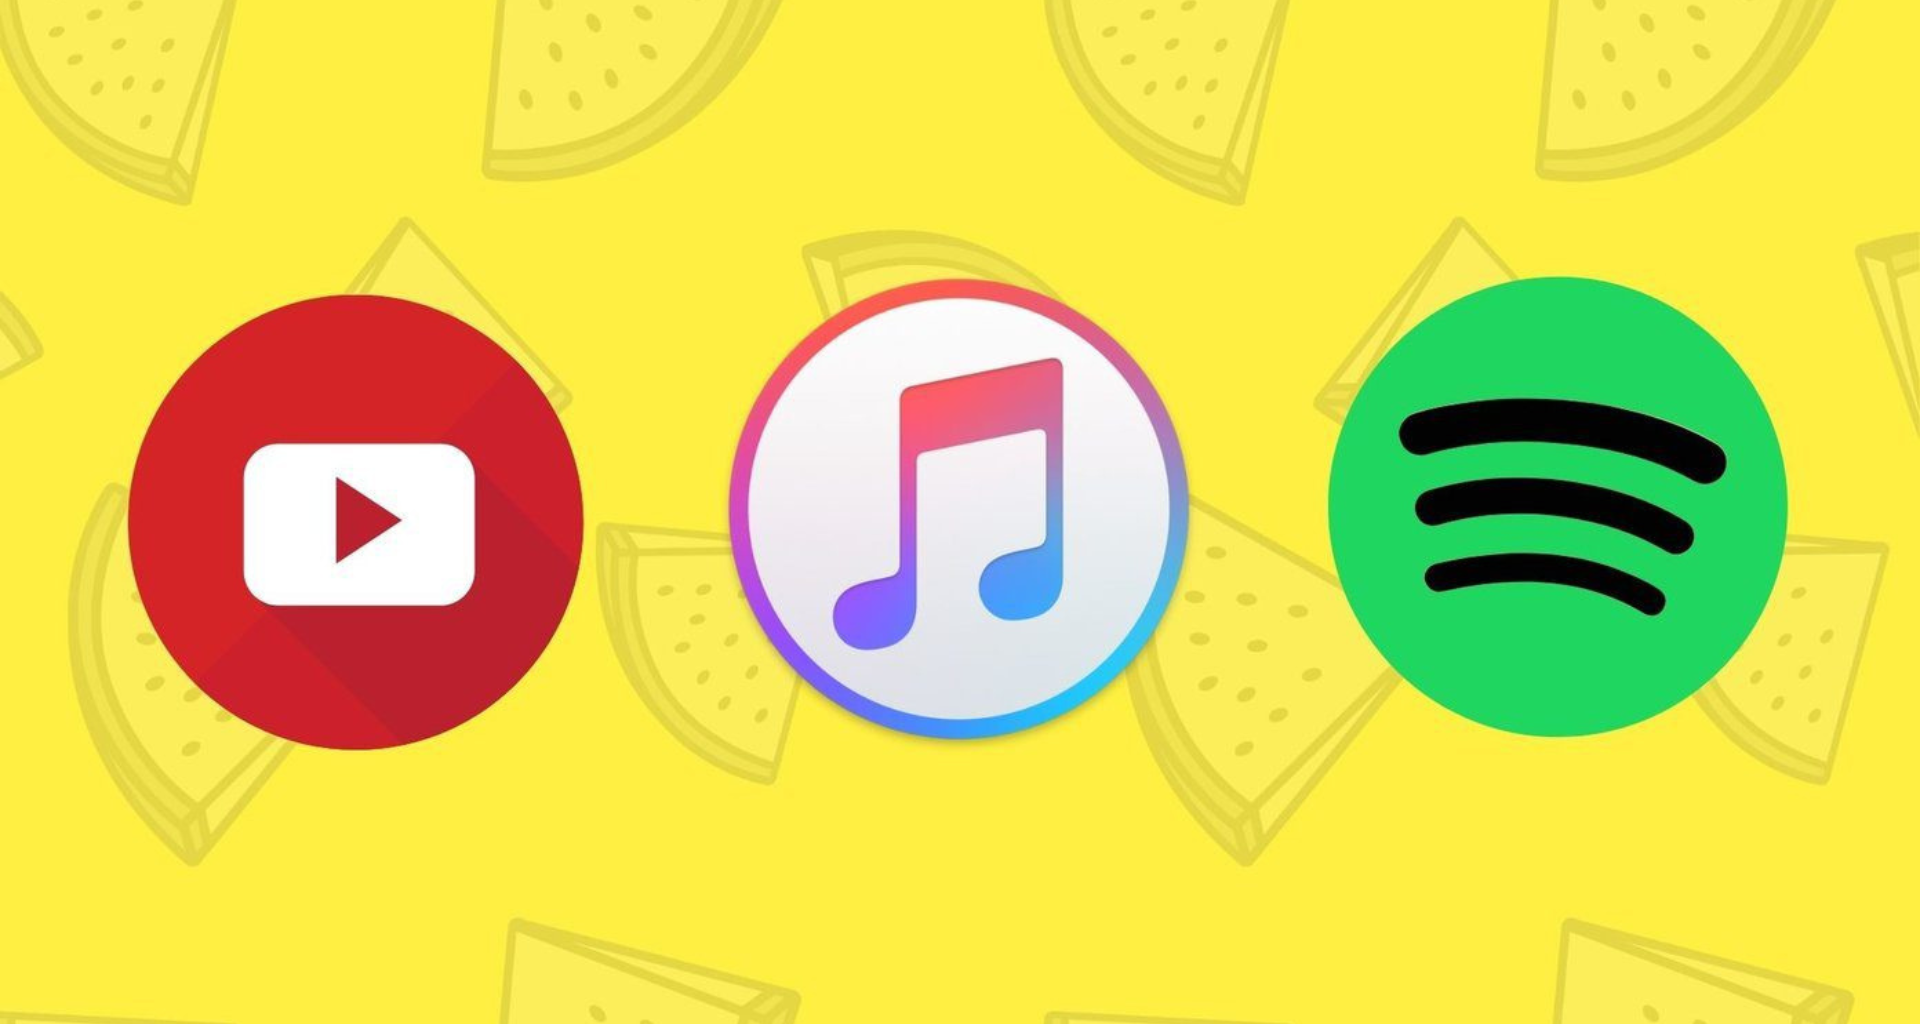 Spotify vs Apple Music vs Youtube Music: which is the best music service?